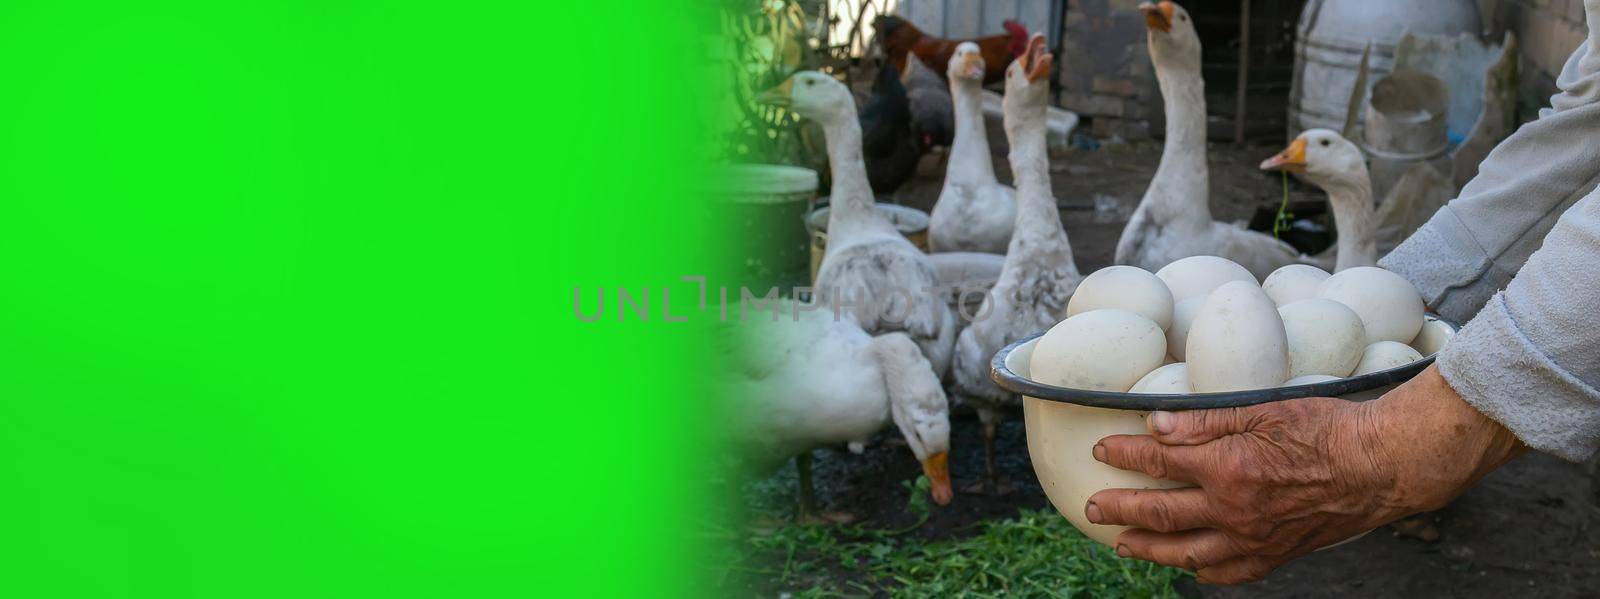 geese and chicken on the farm, eggs in a bowl. selective focus by Anuta23